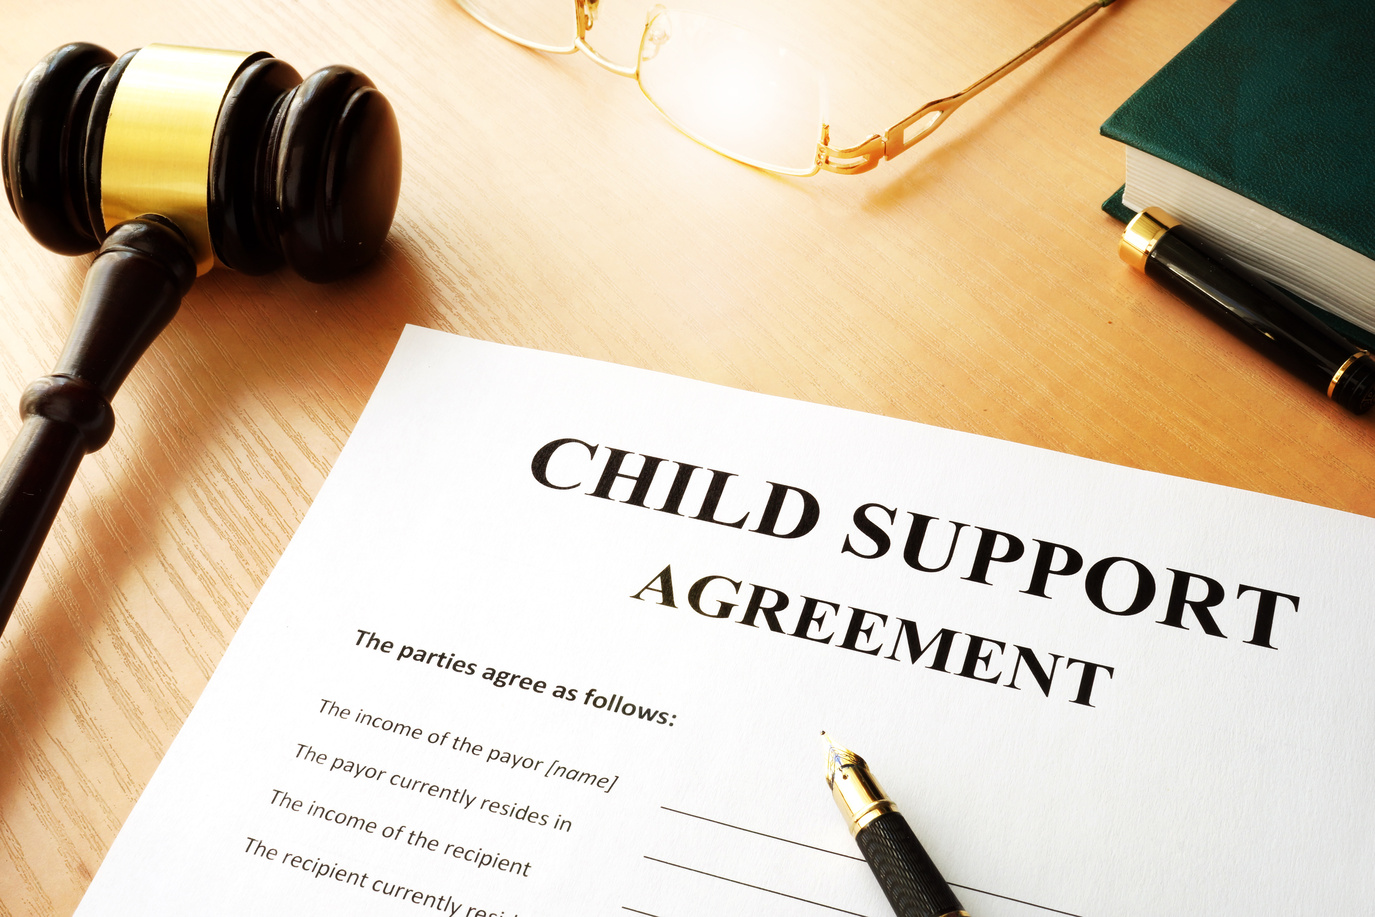 child support agreement document